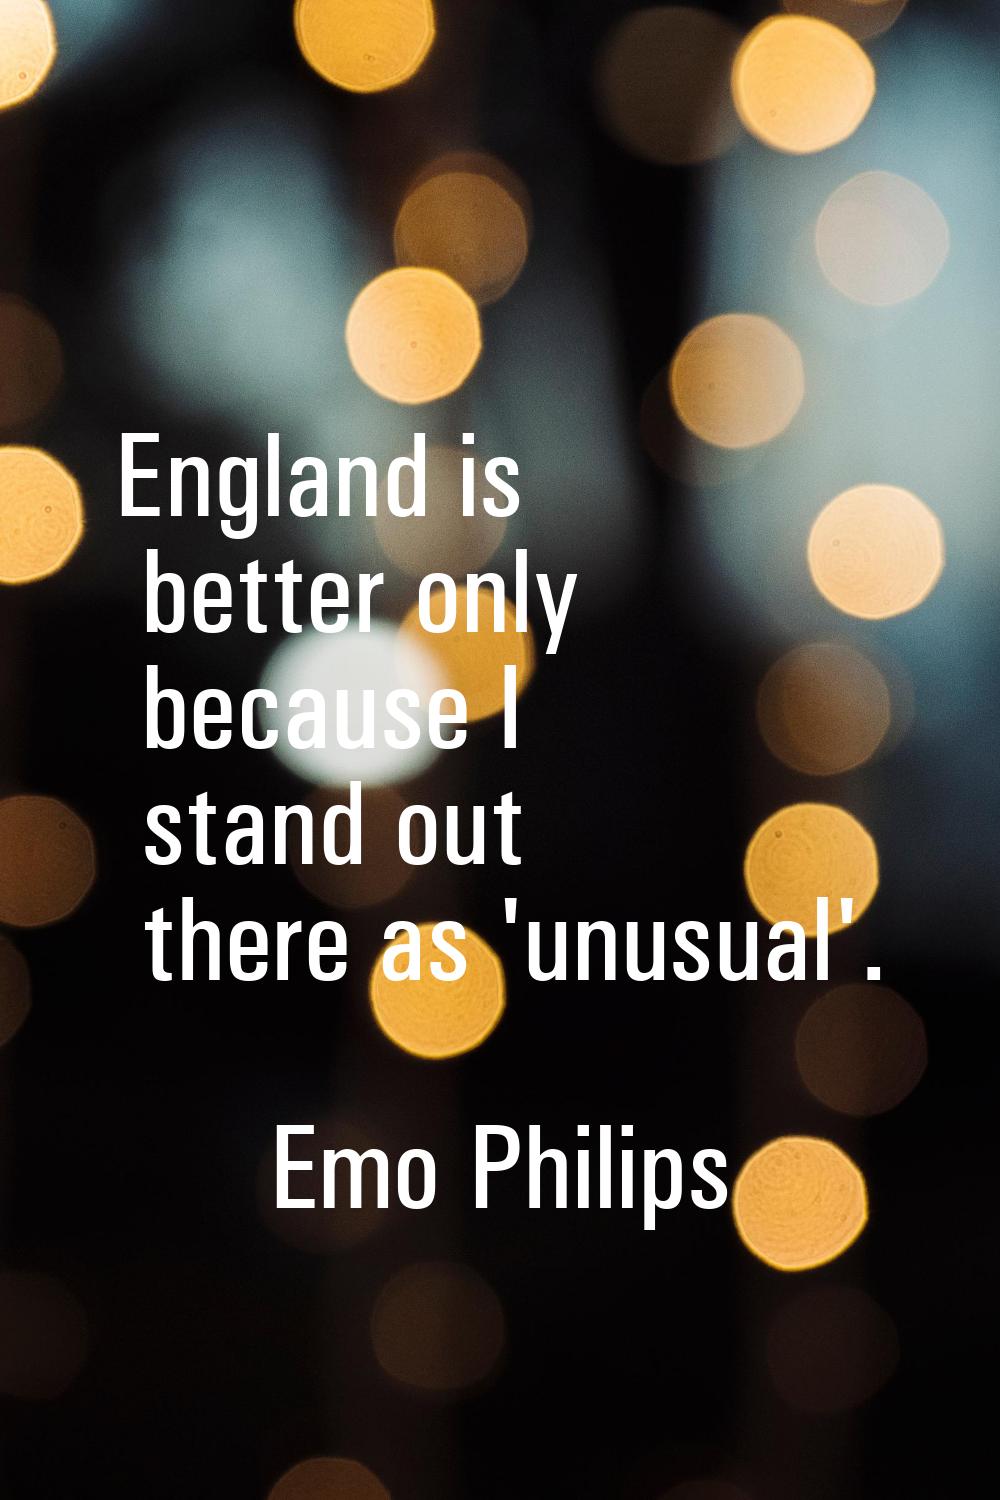 England is better only because I stand out there as 'unusual'.